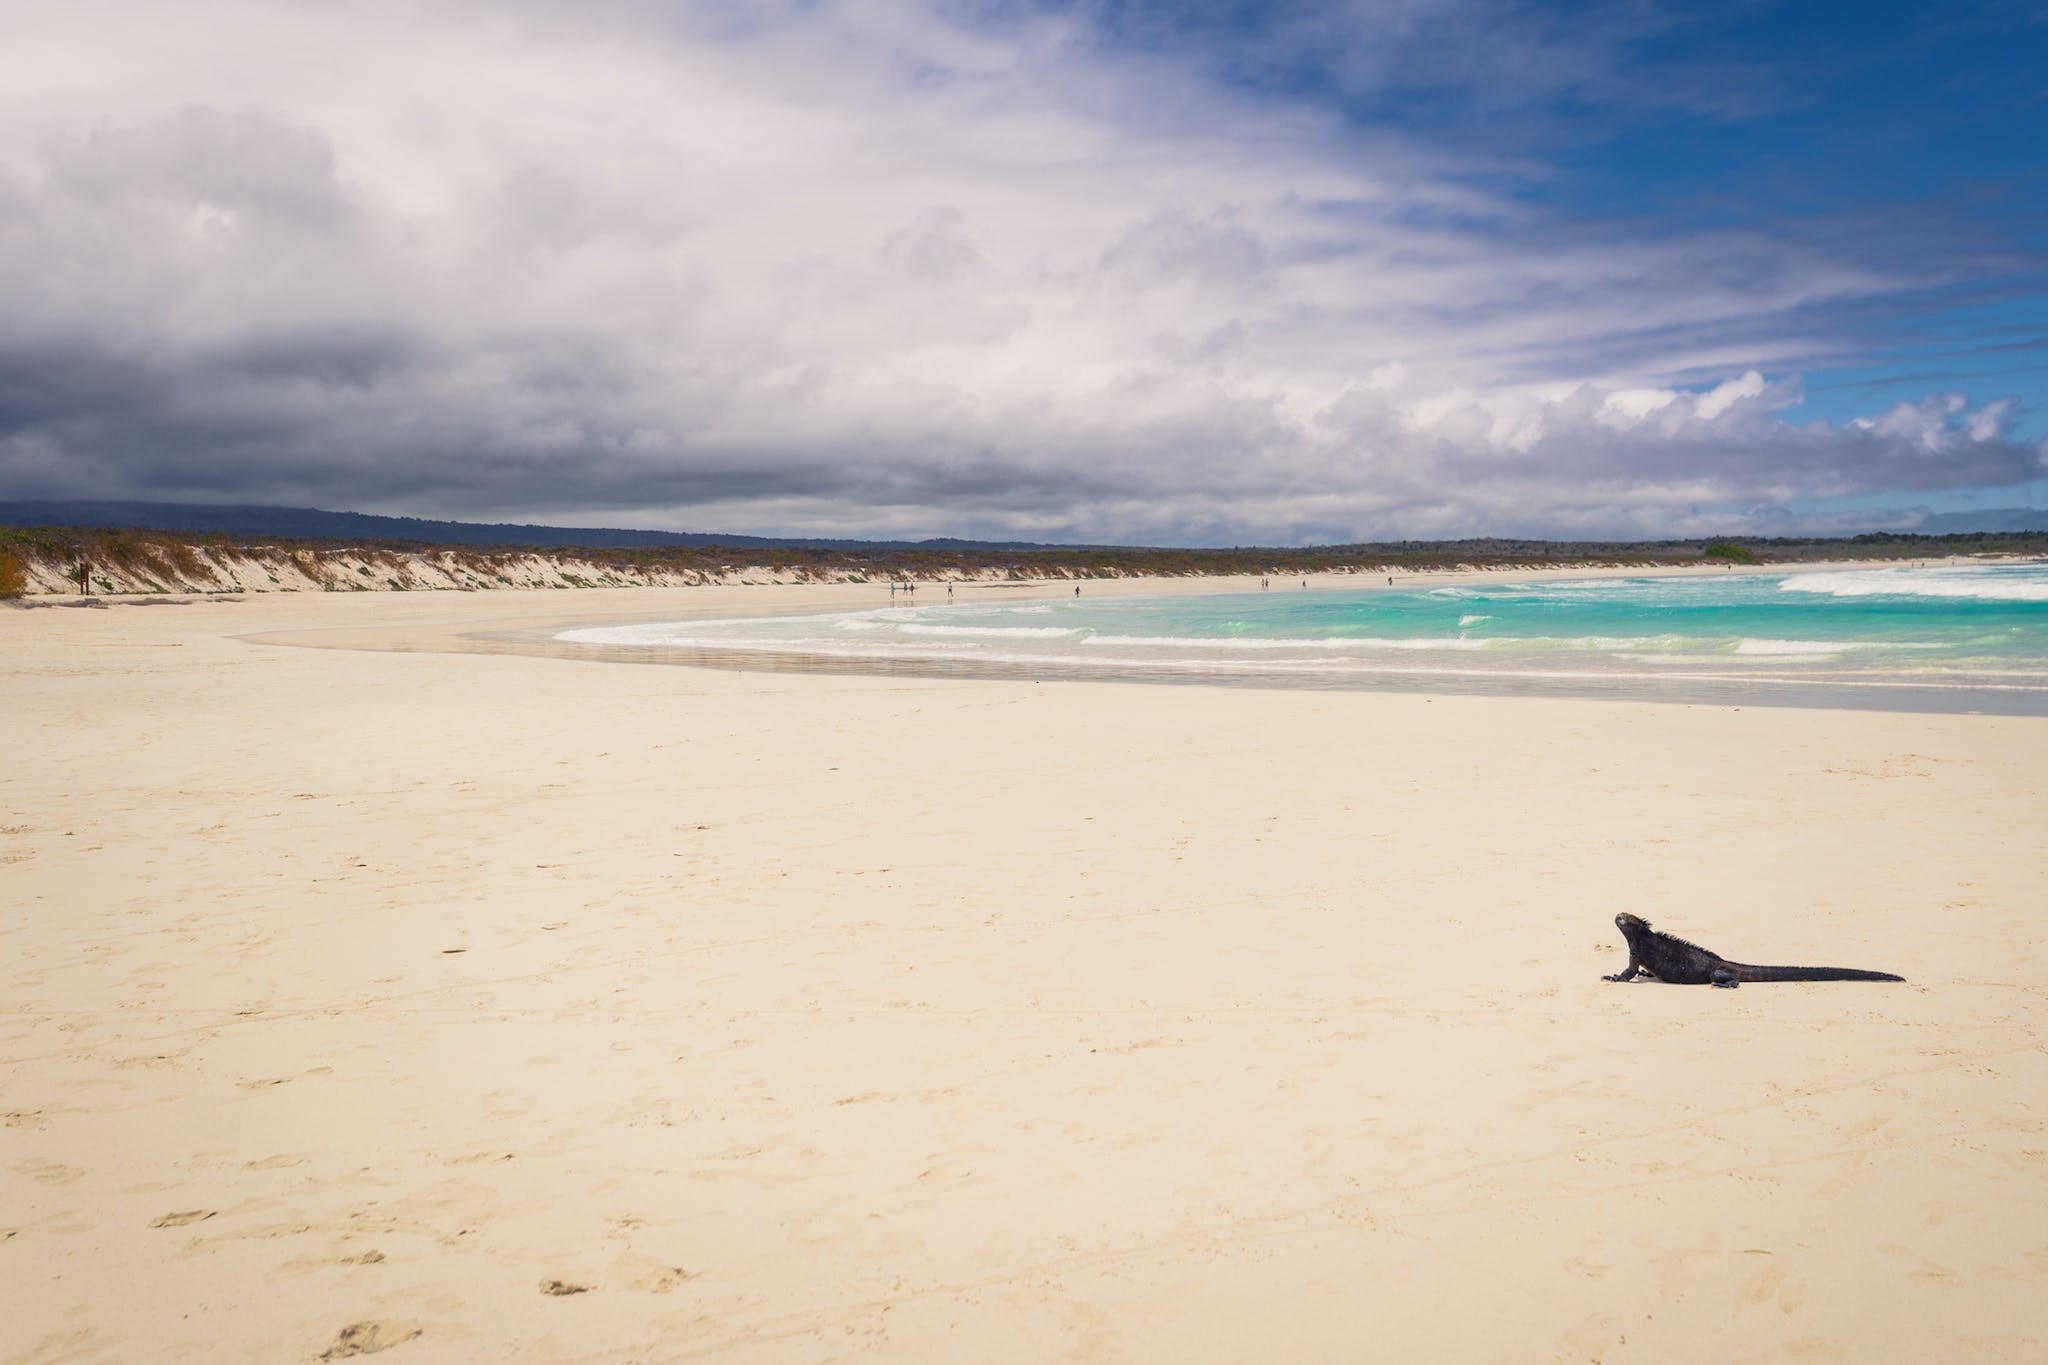 The pristine sands of Tortuga Bay, on the Galapagos Islands. Photo: Getty.